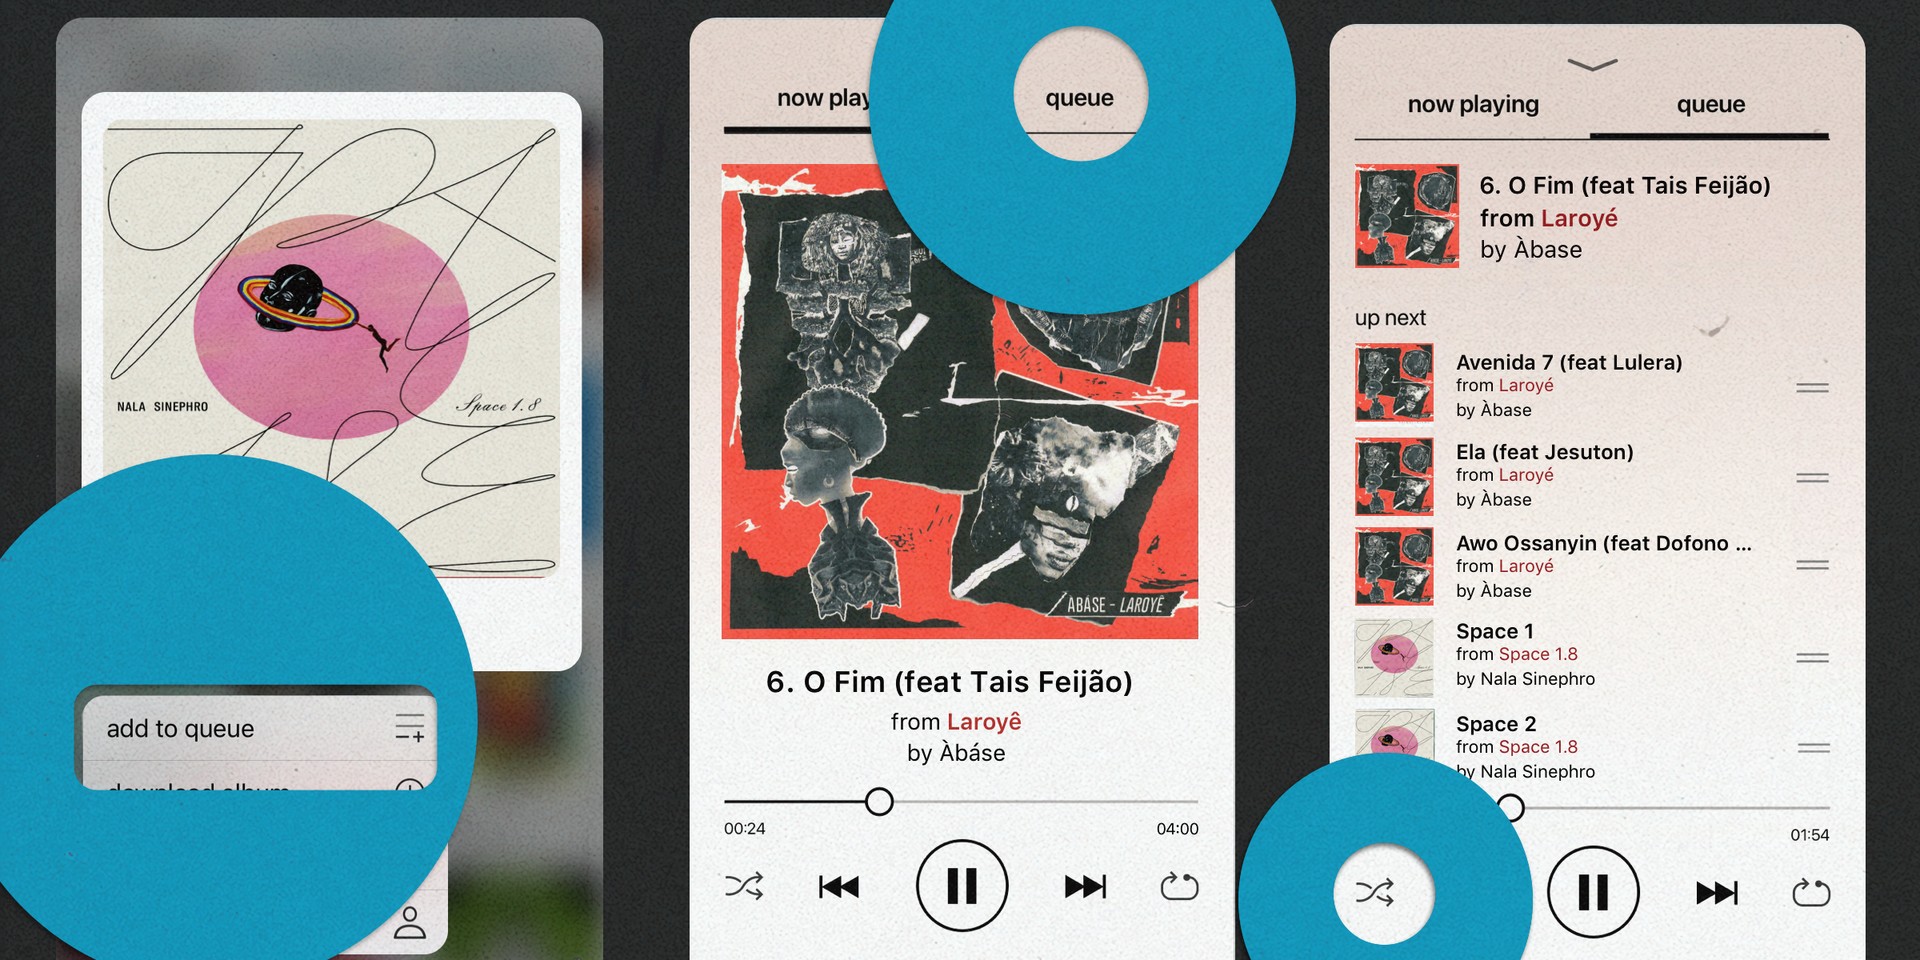 Bandcamp launches new queue feature on mobile app